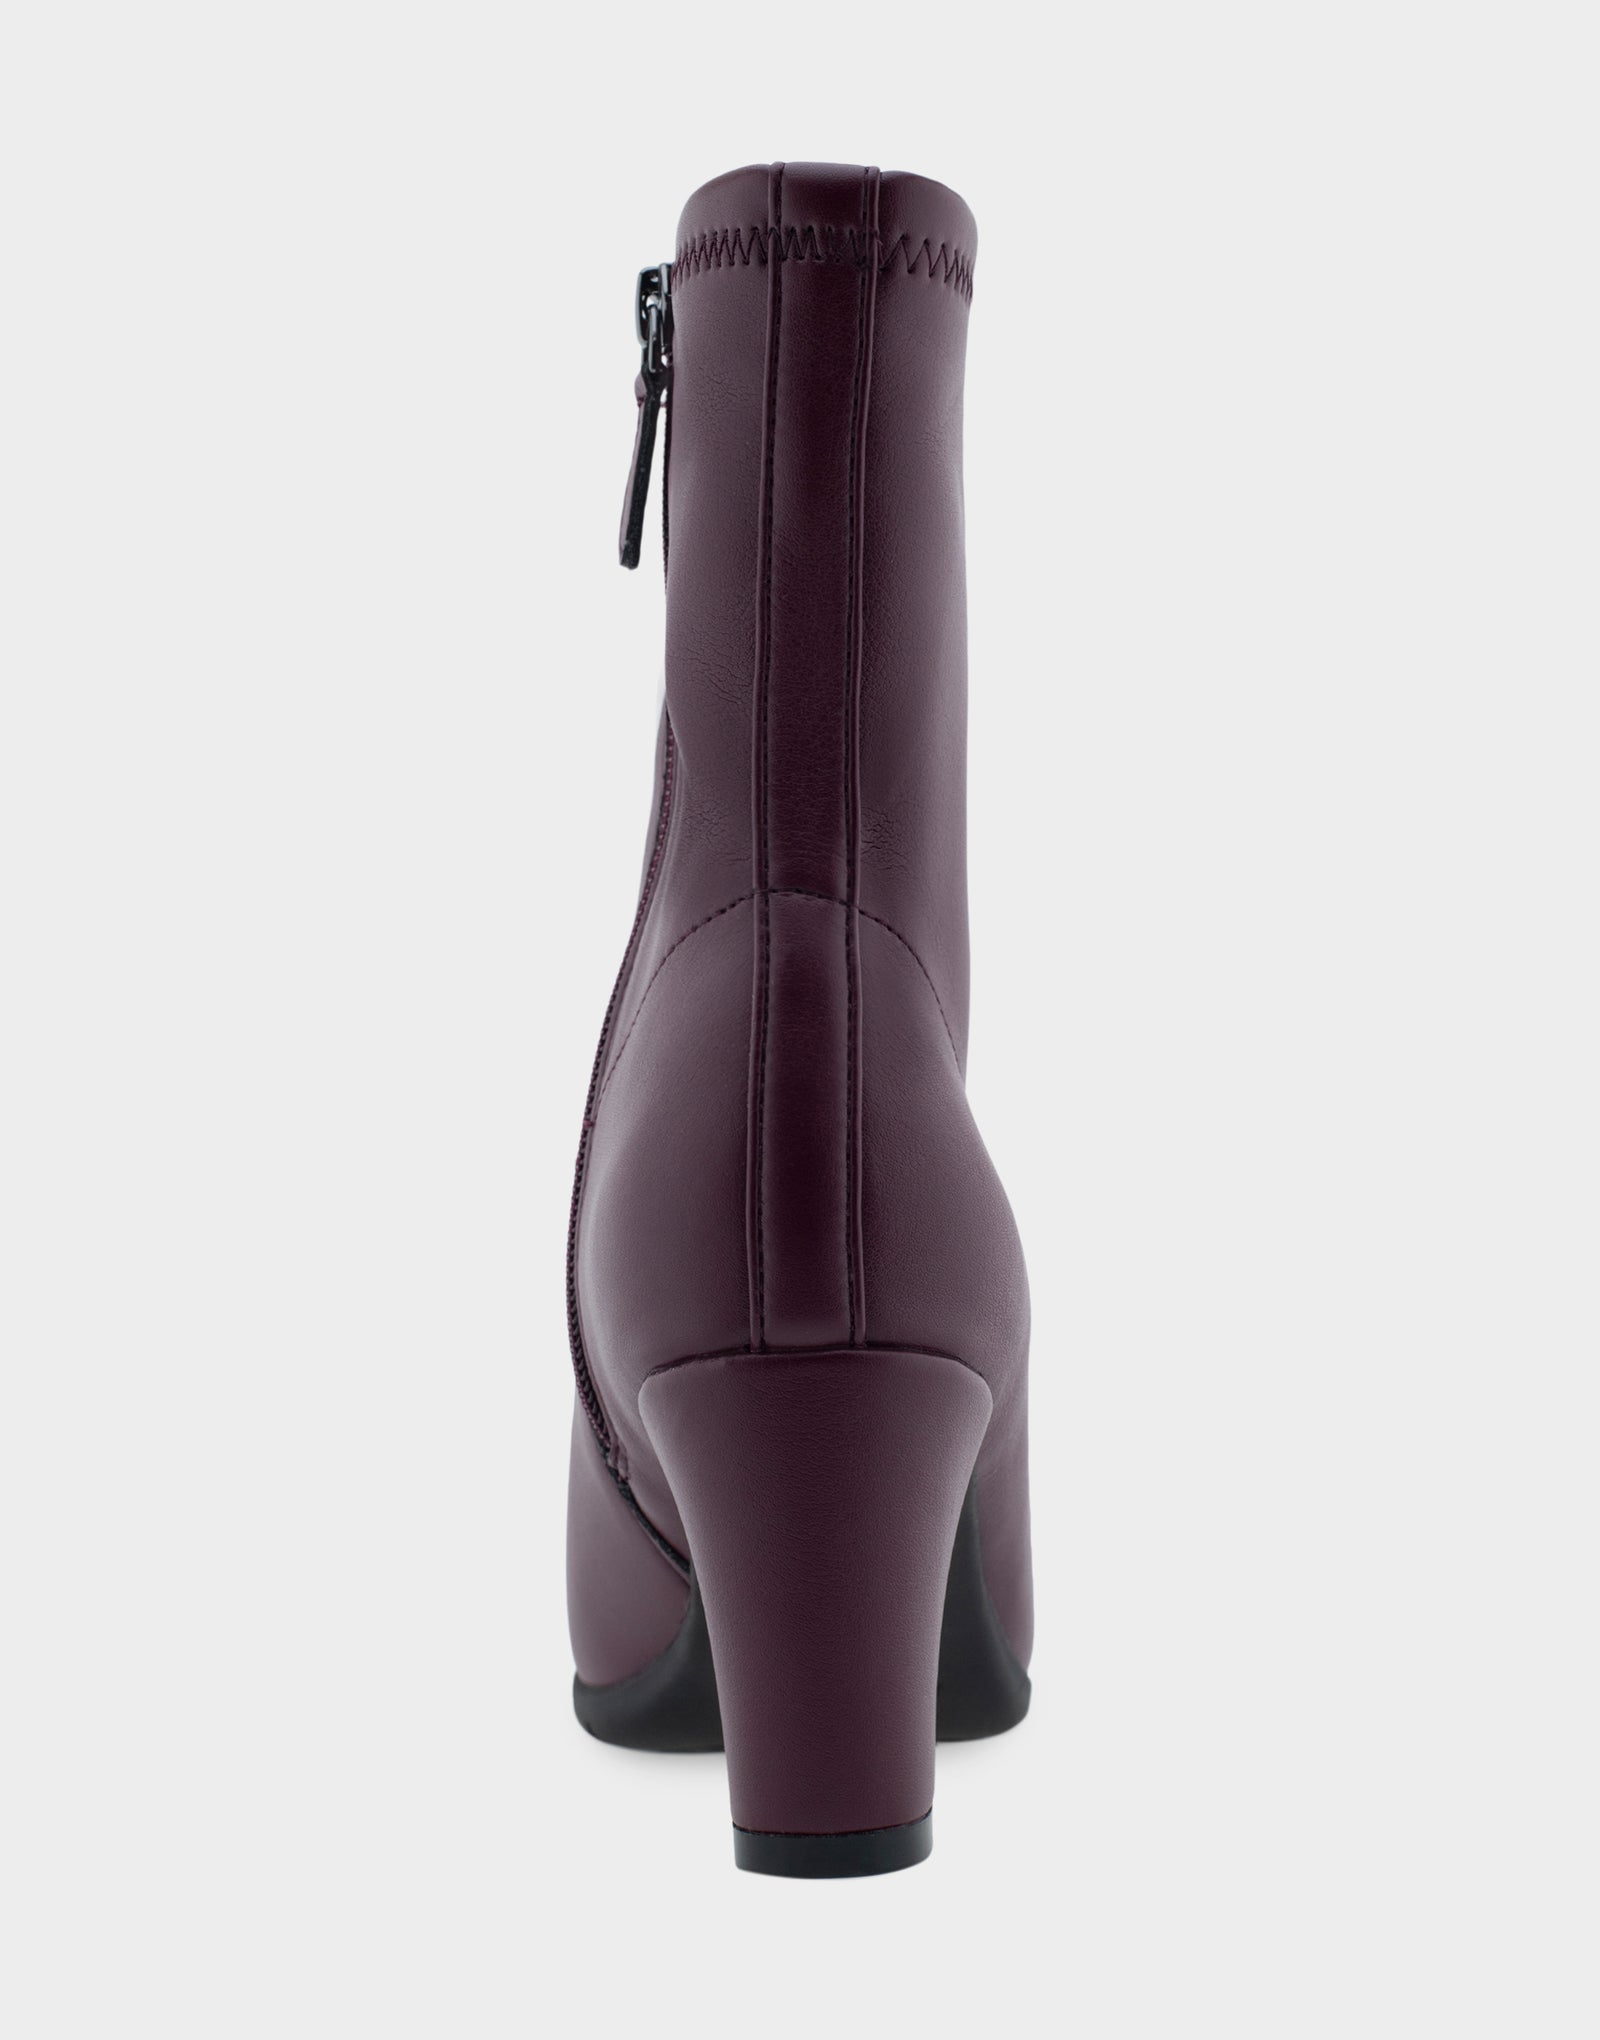 Women's Heeled Ankle Boot in Burgundy